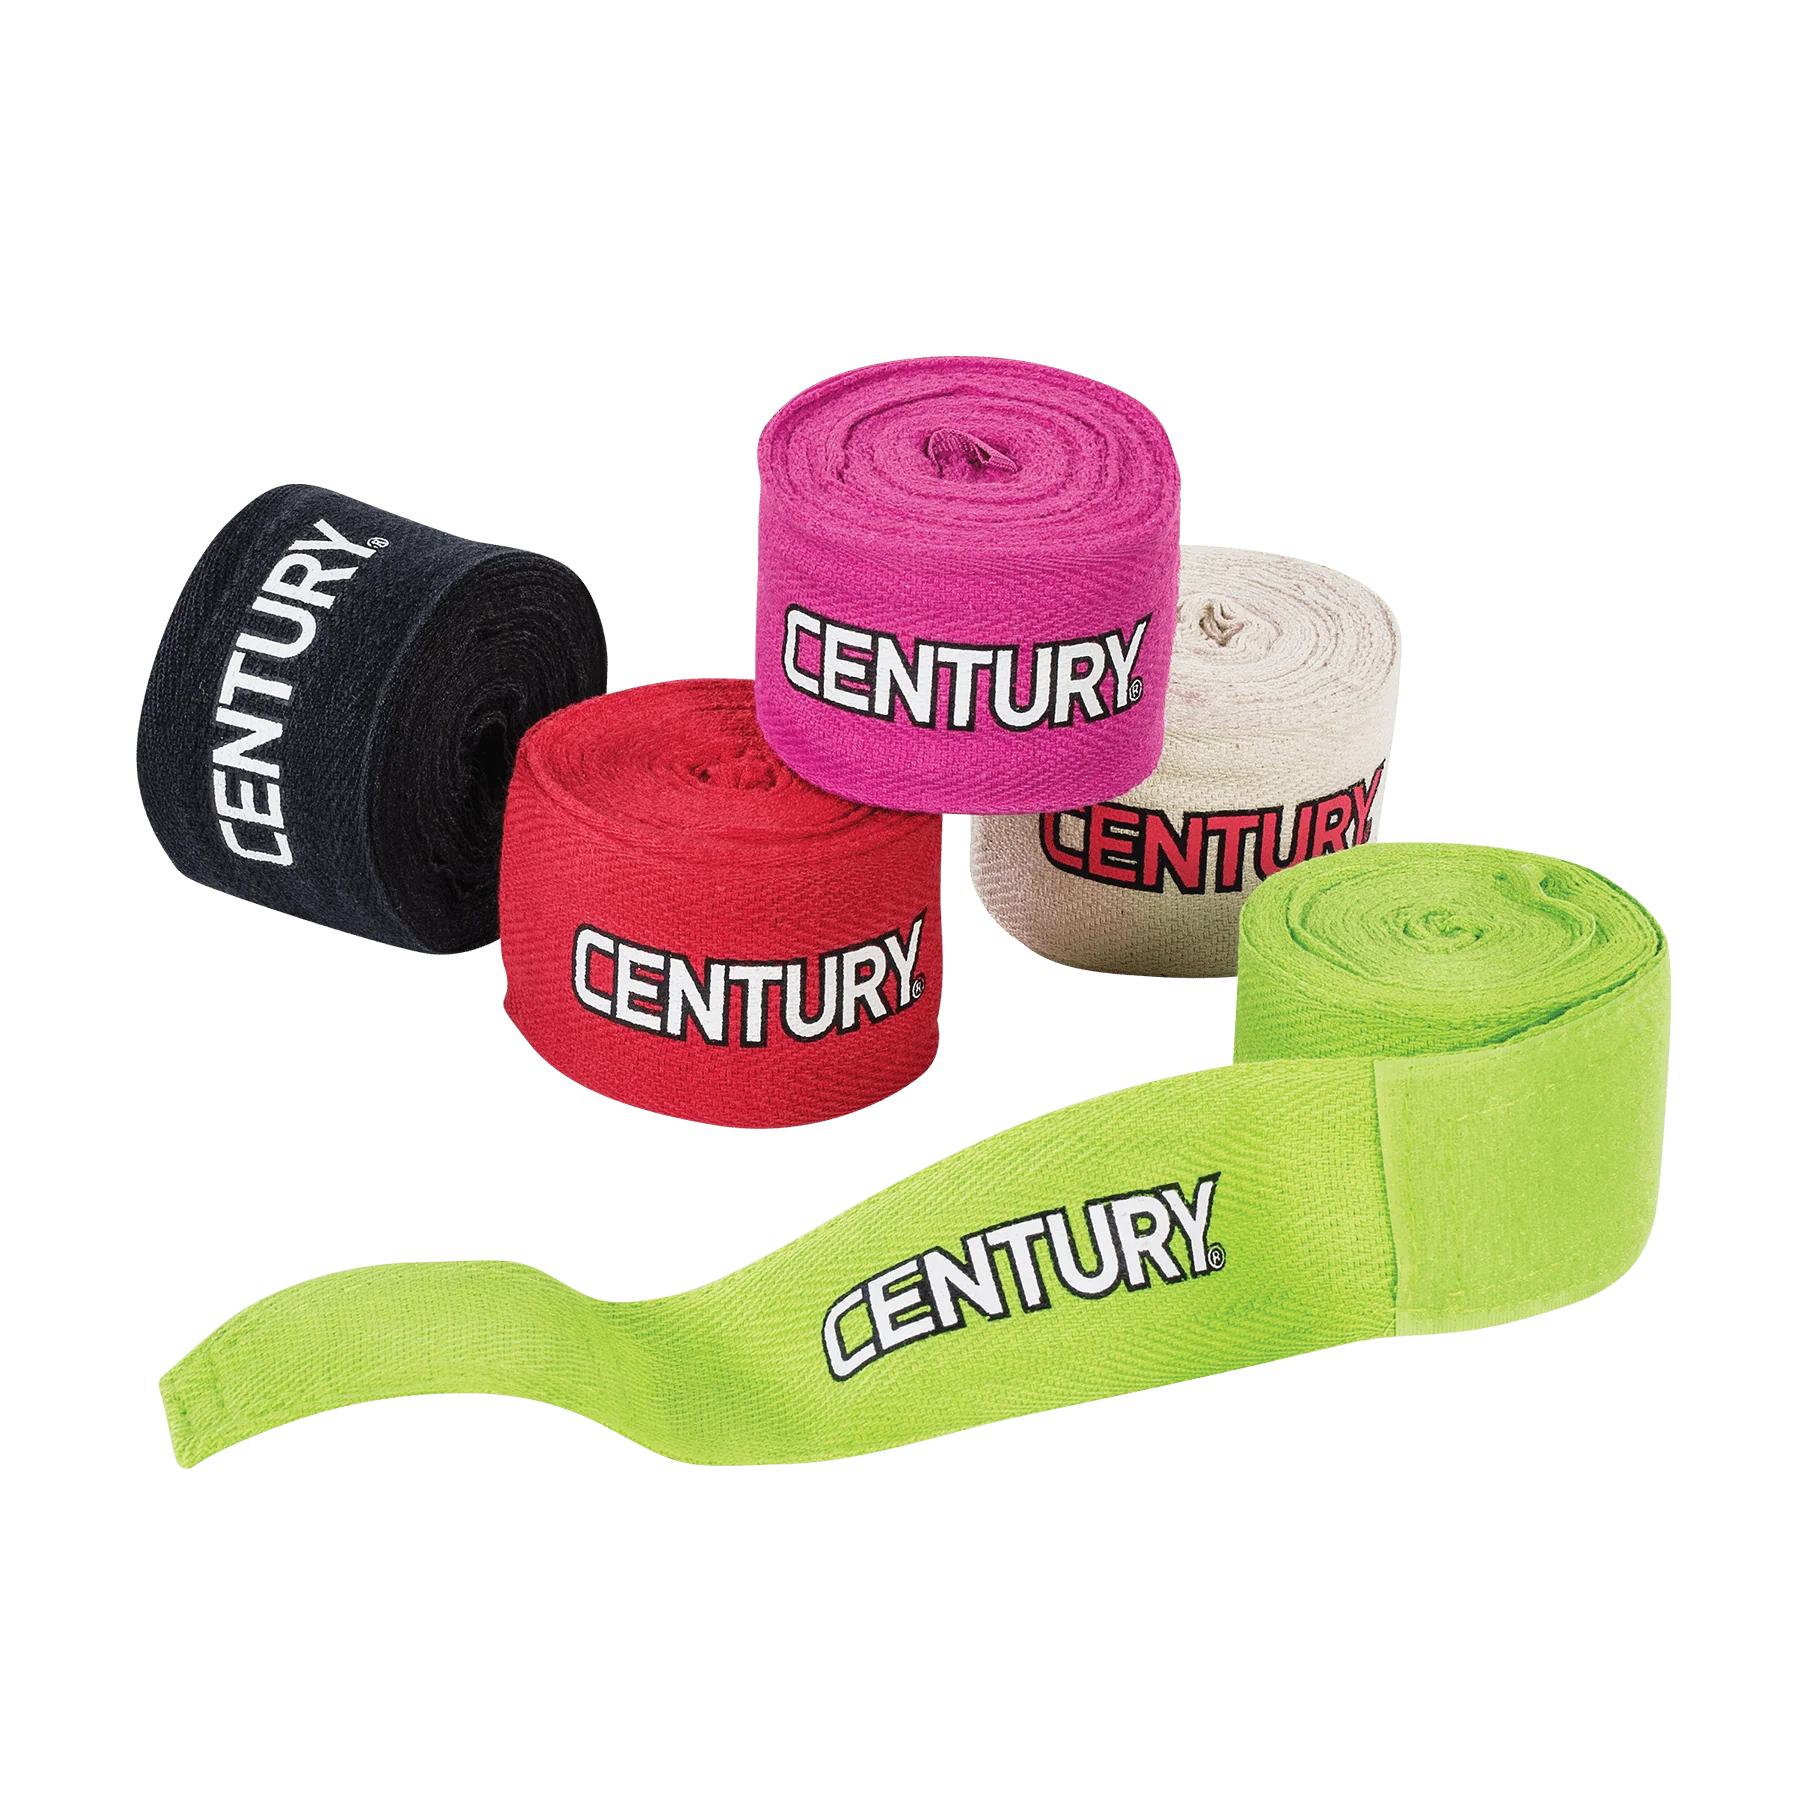 Five rolls of hand wraps in different colors. Black, red, pink, green, and white